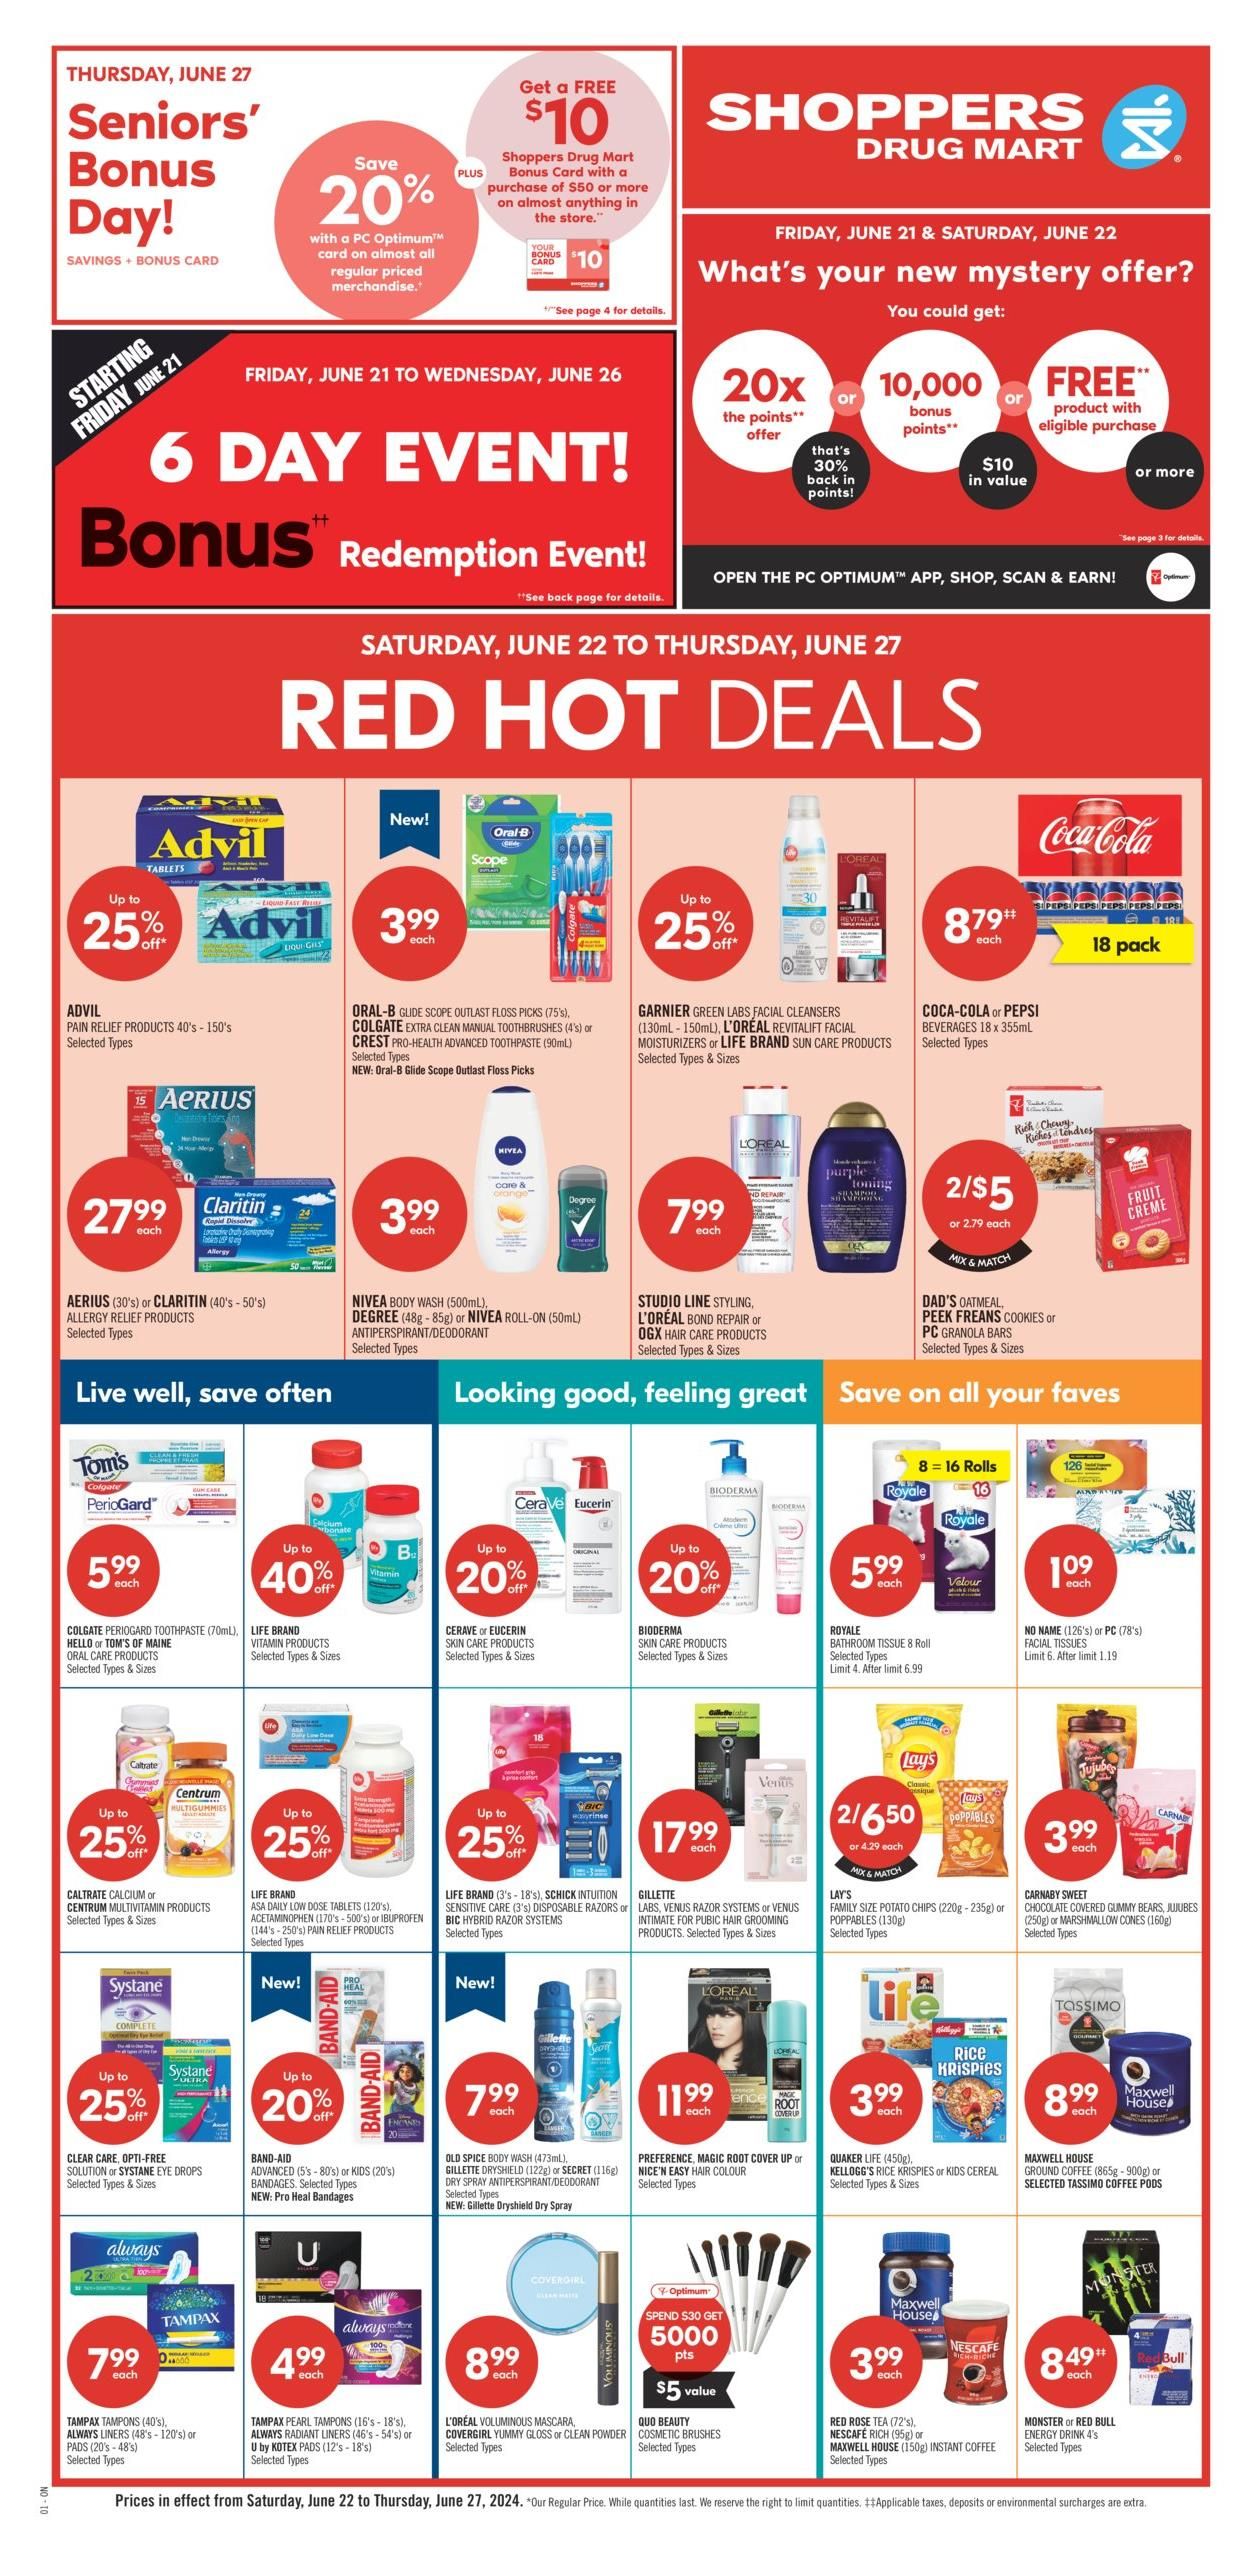 Shoppers Drug Mart - Weekly Flyer Specials - Page 1